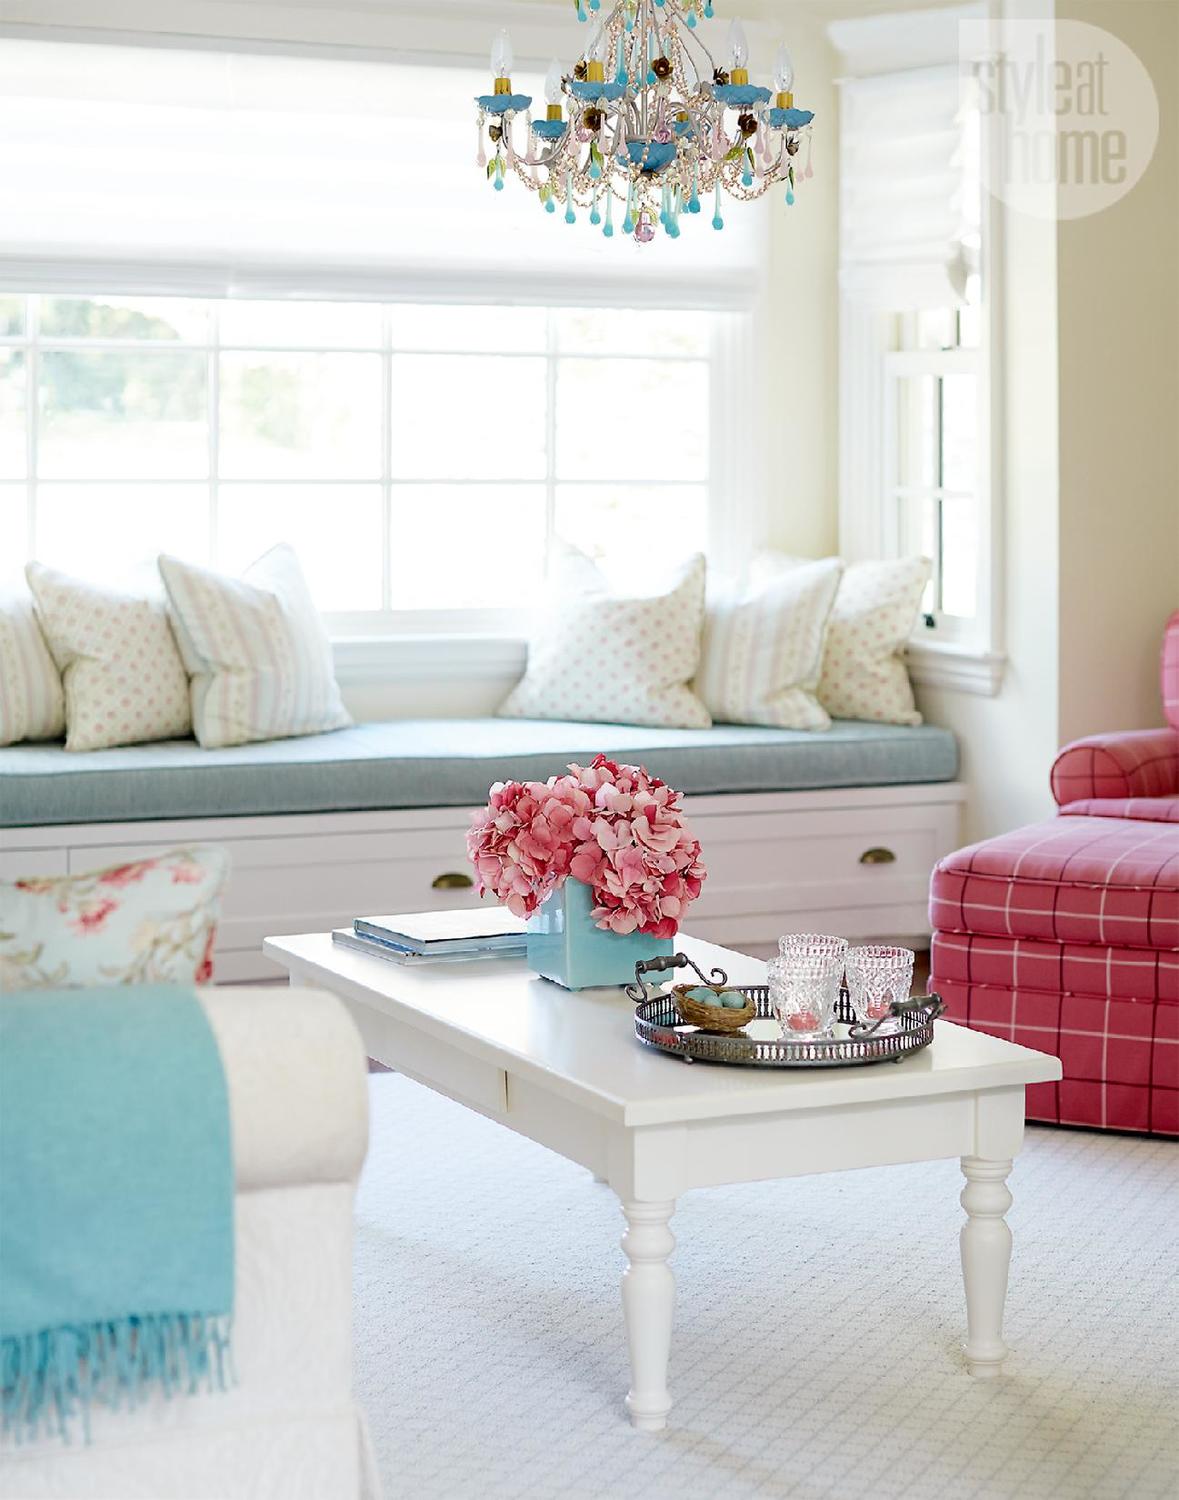 Home Sweet Home: ECLECTIC SHABBY CHIC